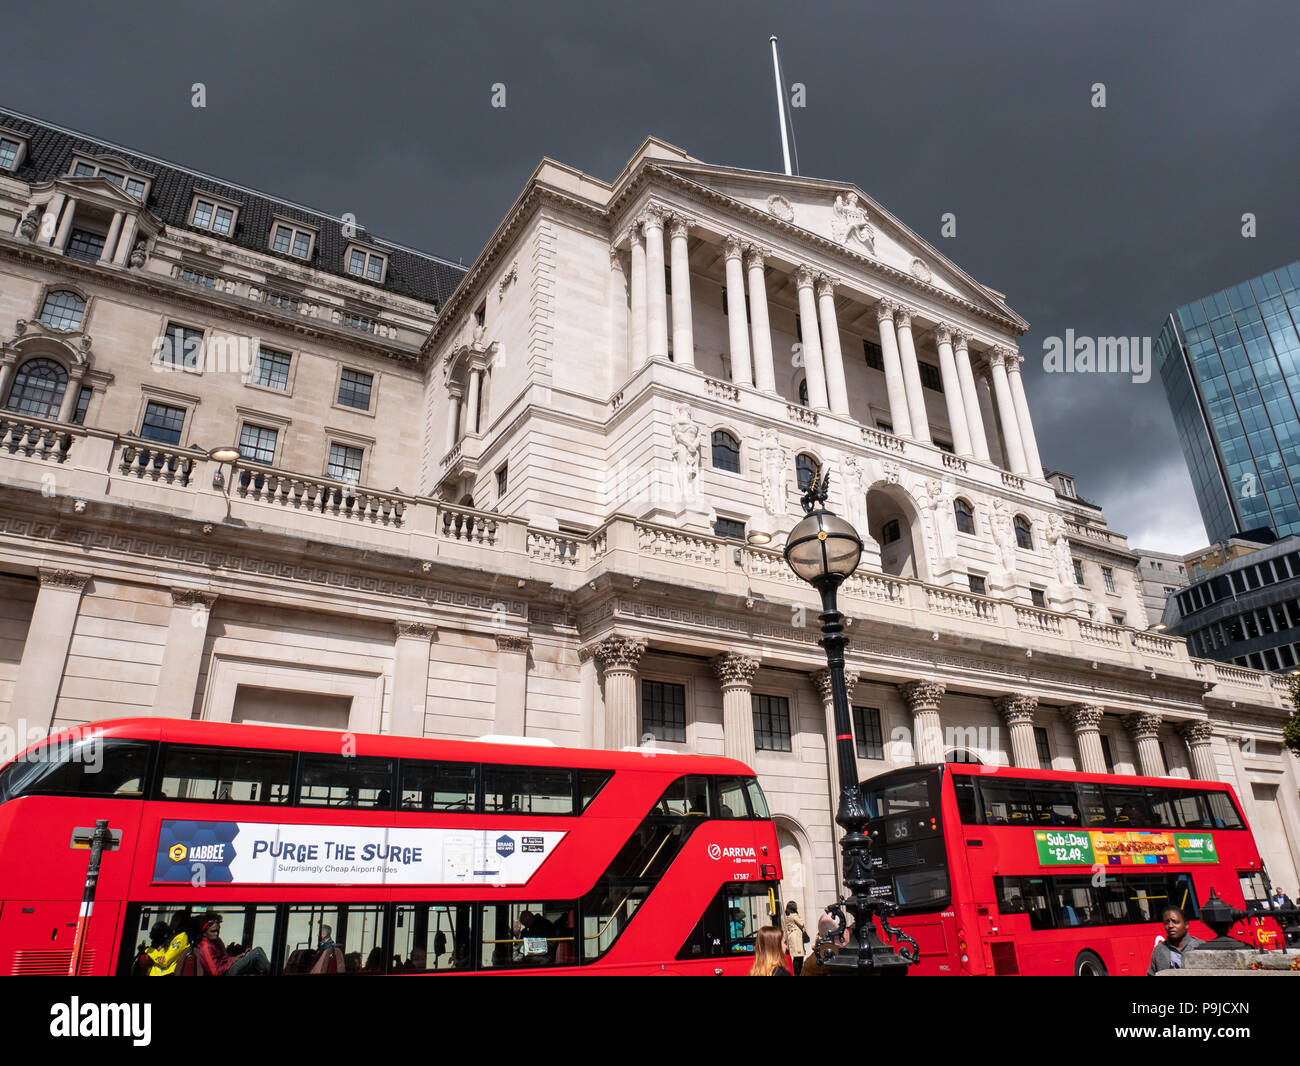 The Bank of England Under Dark Clouds, Londres, Royaume-Uni Banque D'Images